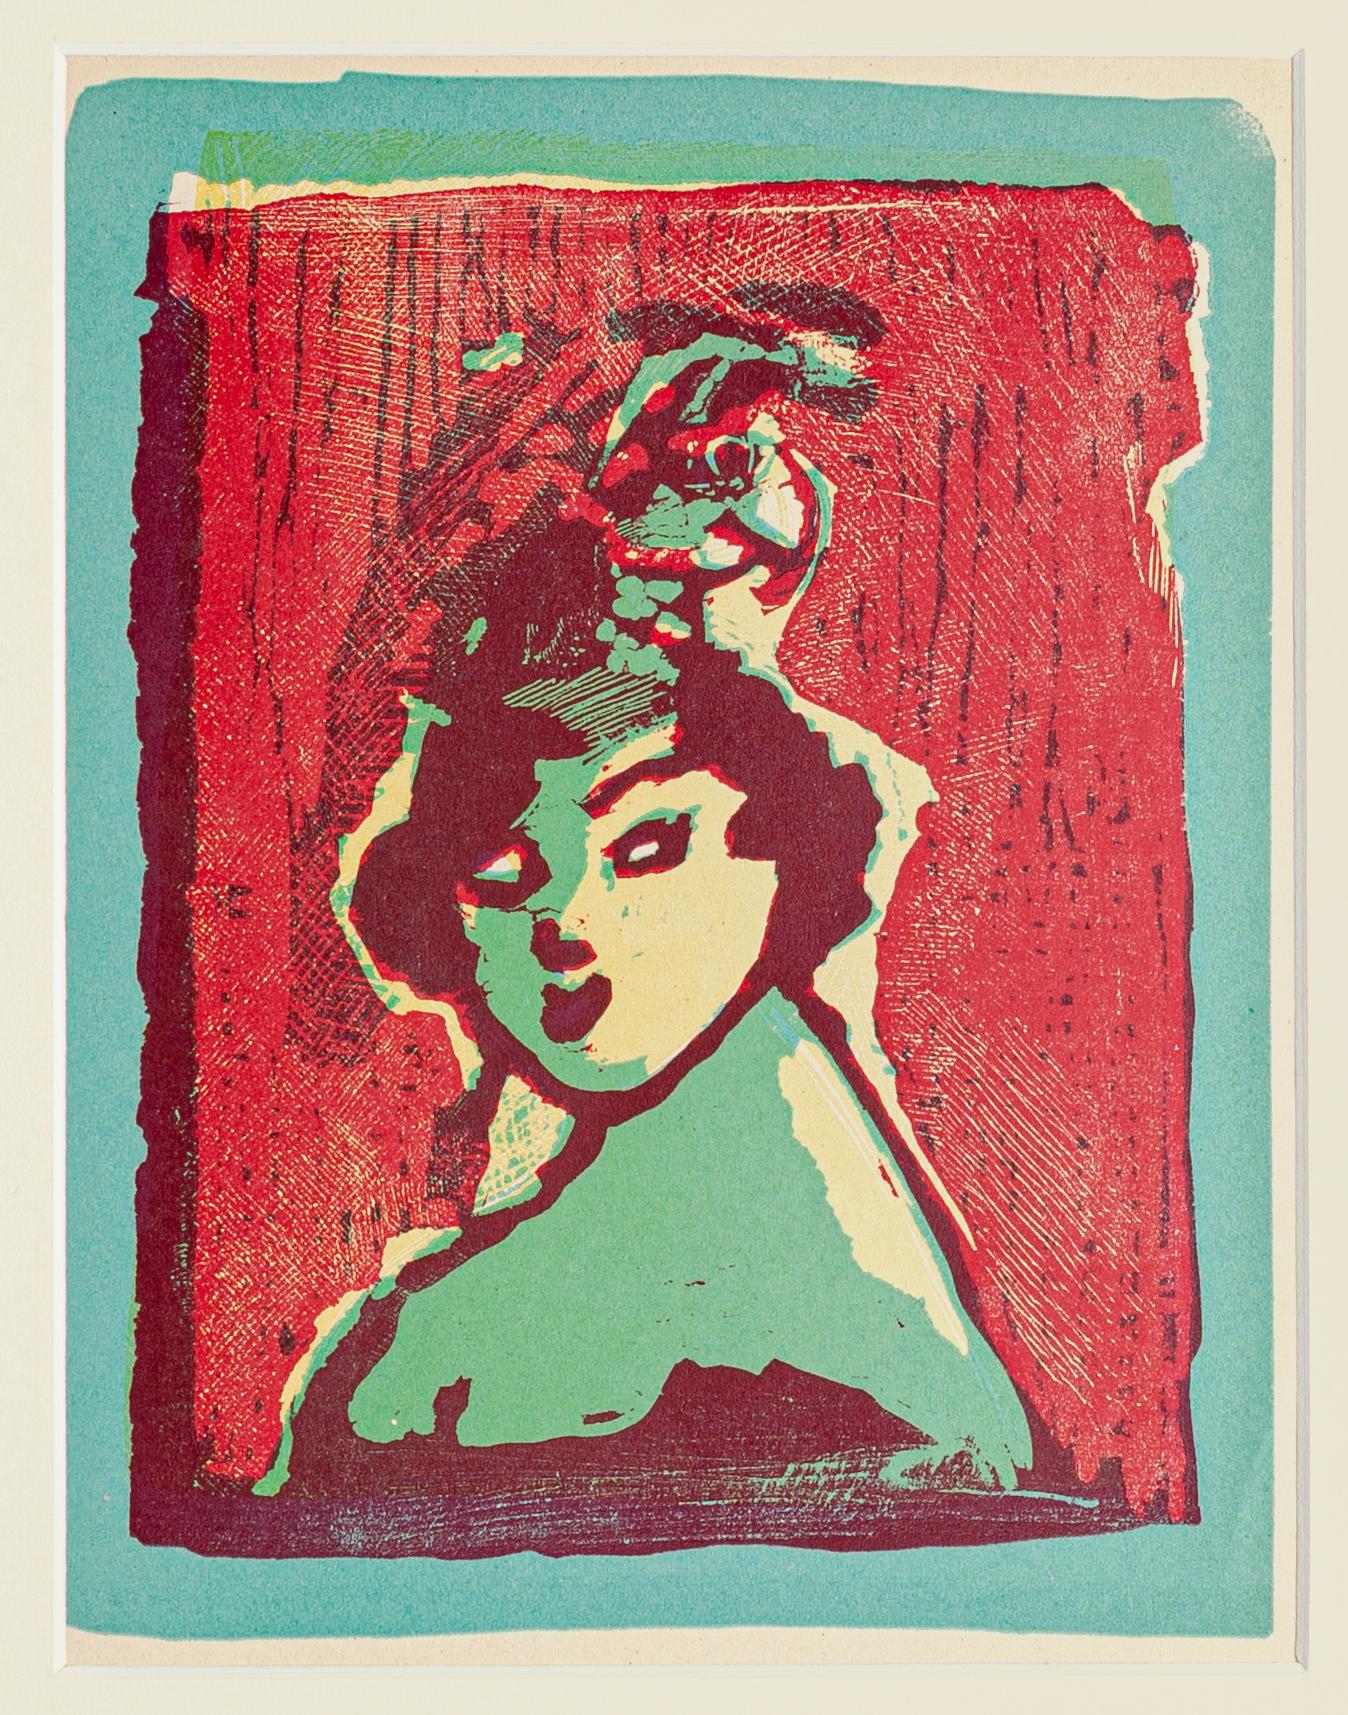 Woman is an original woodcut realized by Mino Maccari.

Included a white Passepartout: 49 x 34 cm.

The state of preservation is very good.

Mino Maccari (Siena, 1898 – Rom, 1989) was a popular Italian painter and engraver. He produced many artworks